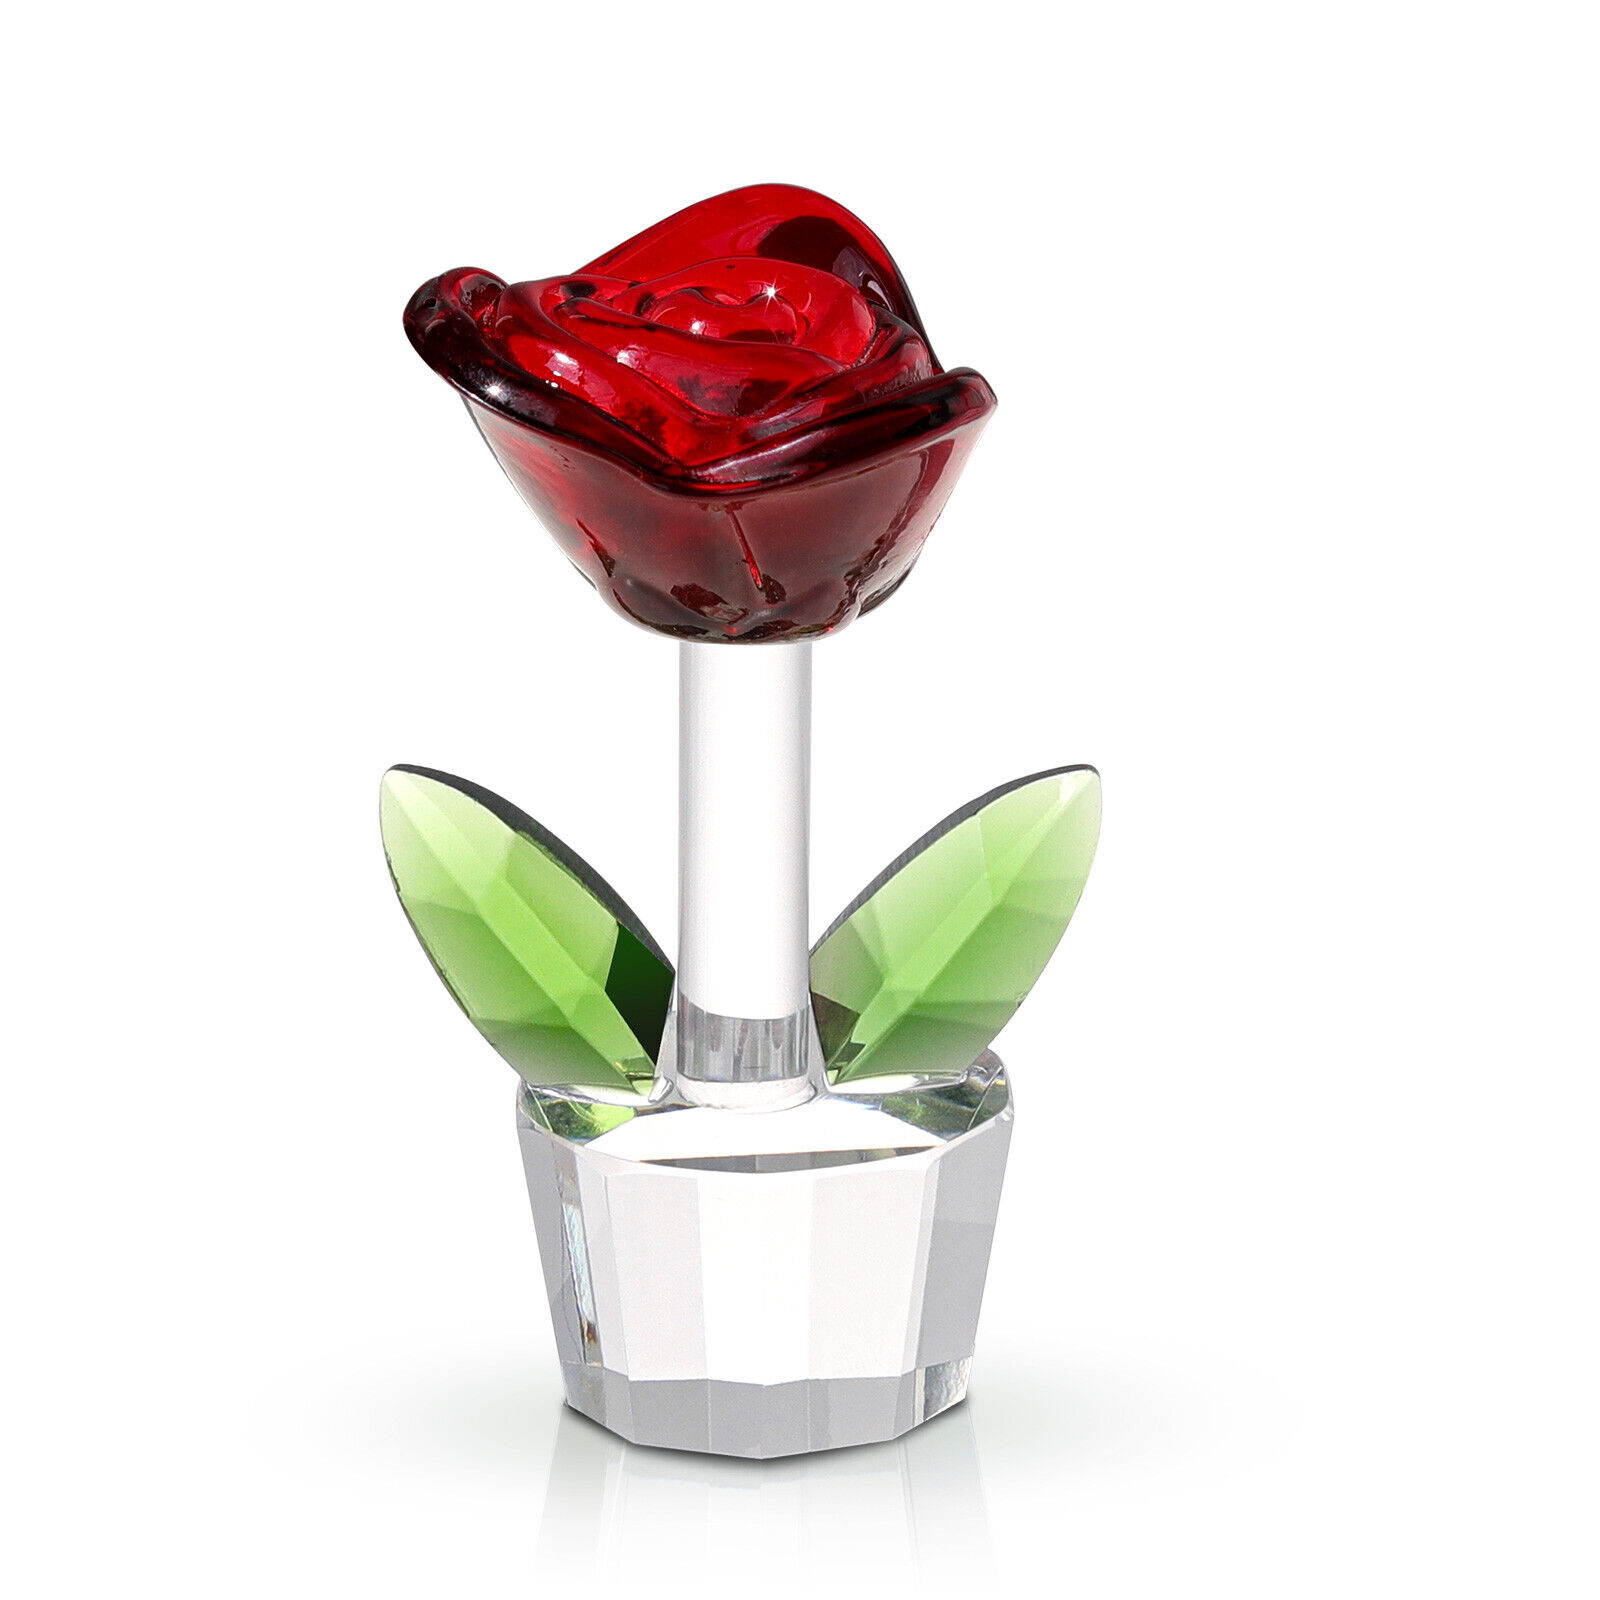 Red Crystal Tulip Flower Figurine Collectible Glass Bouquet Ornament Home Decor